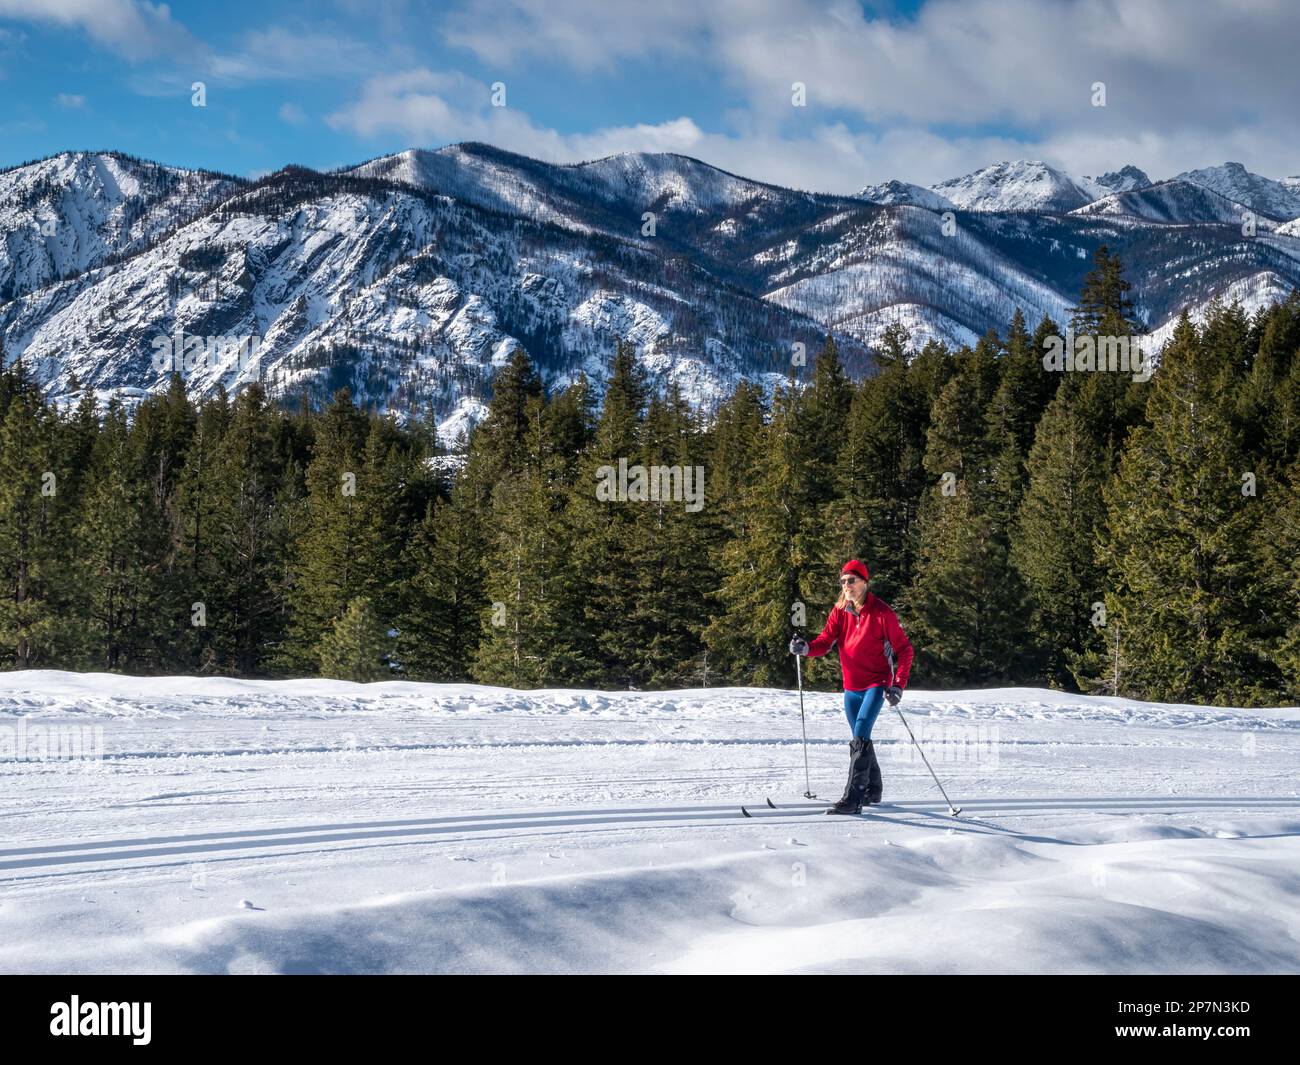 WA23235-00...WASHINGTON - Skier ascending the Lower Fawn Creek cross-country ski trail in the Rendezvous Trail system of the Methow Valley with the mo Stock Photo